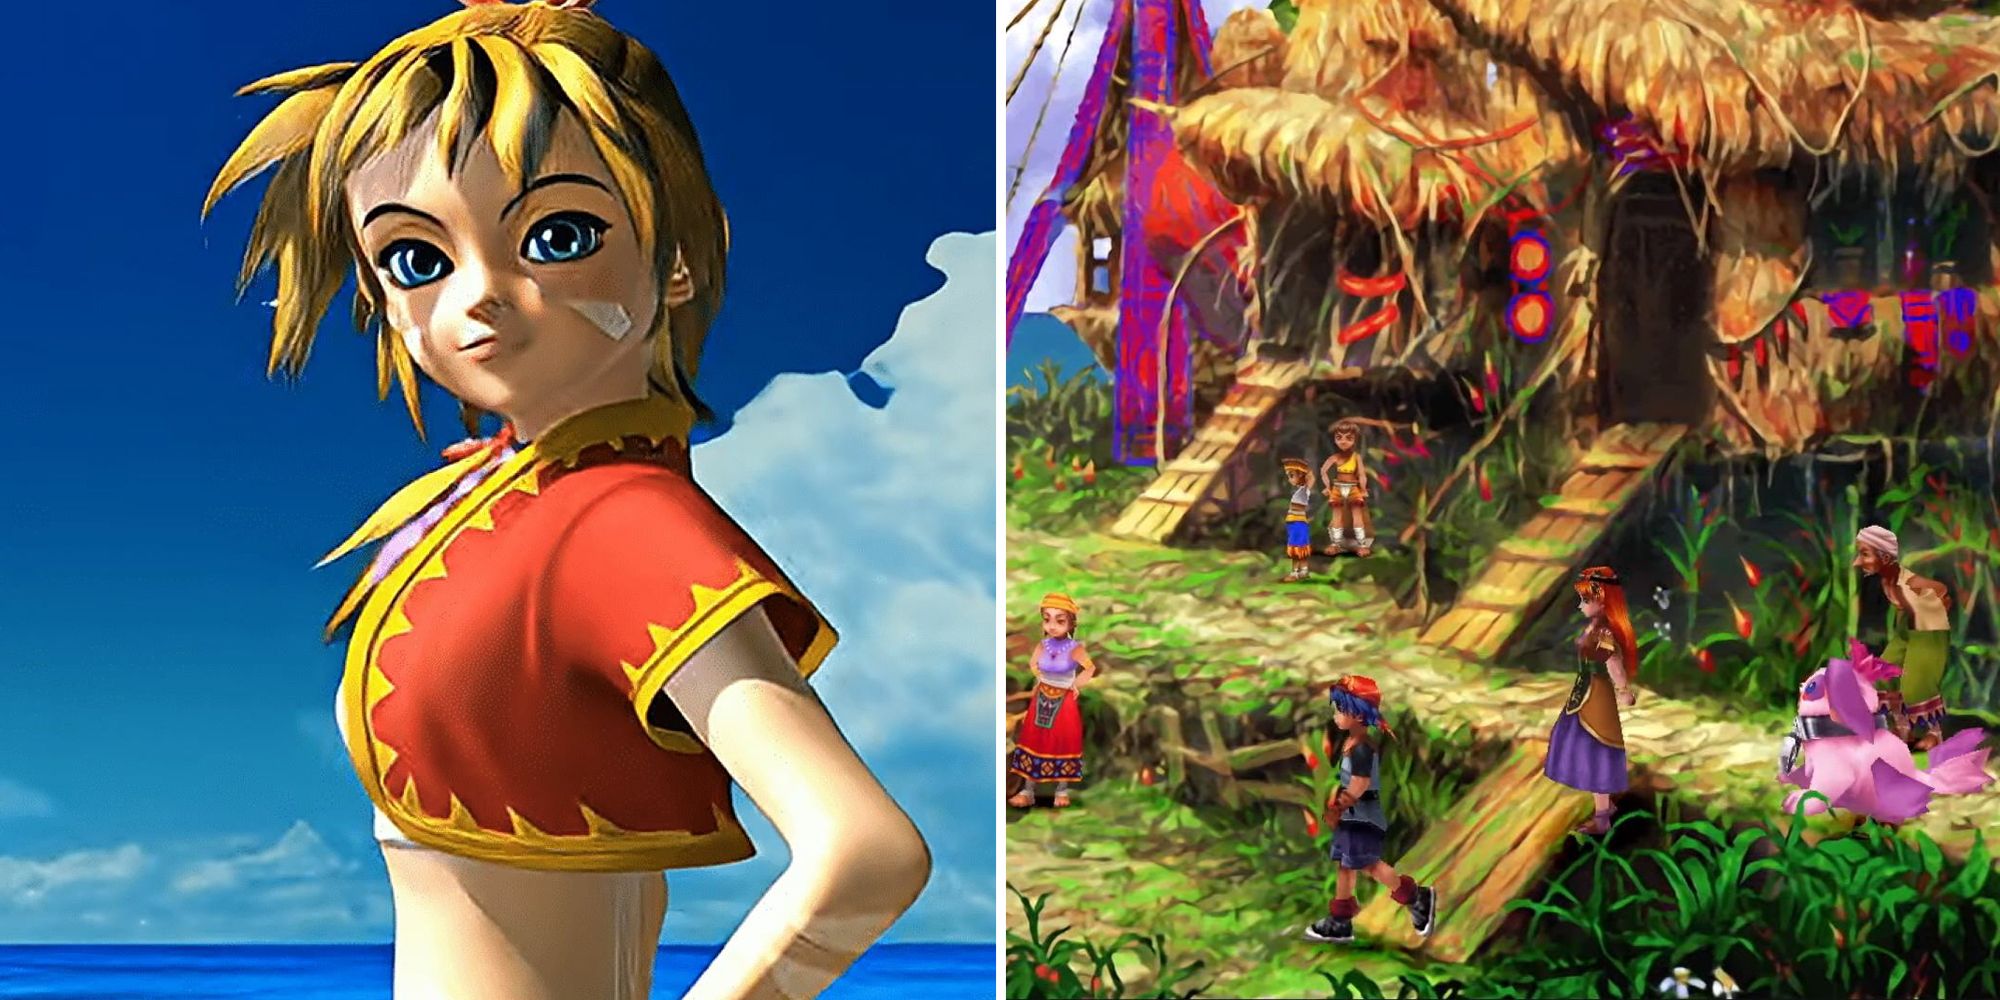 Chrono Cross Kid looking out into the ocean and town exploration